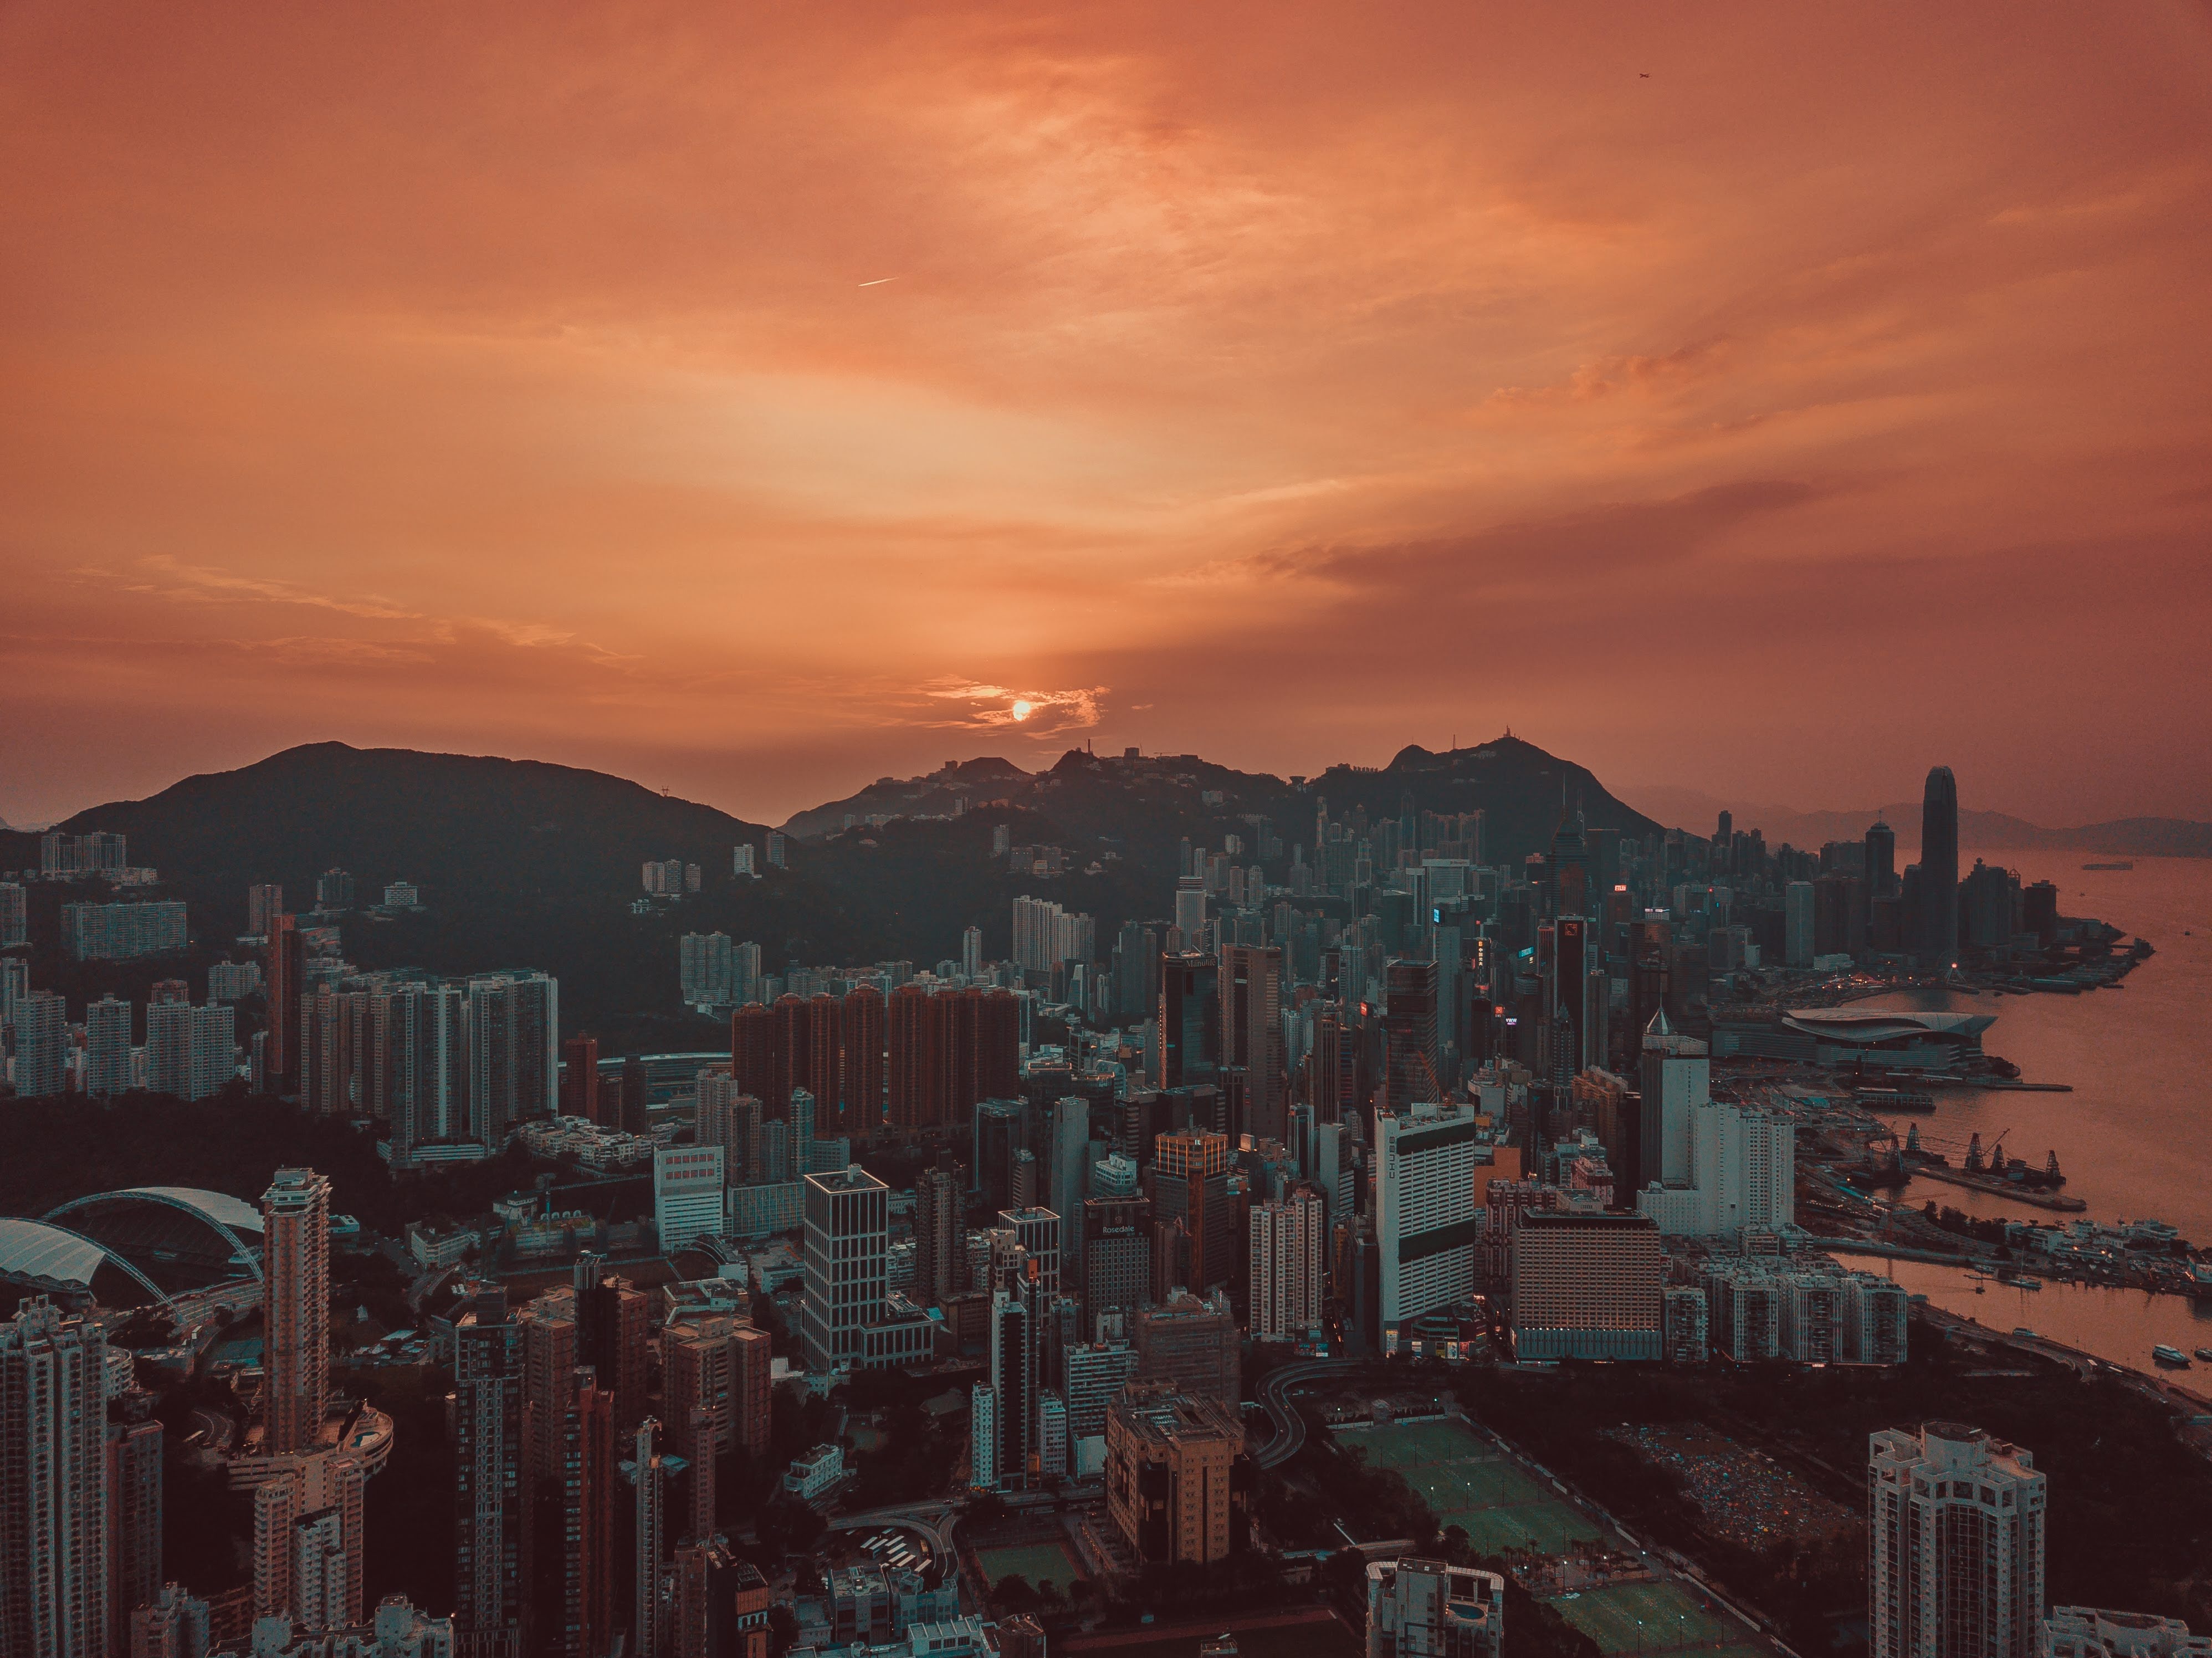 hong kong, cities, sunset, sky, city, view from above, skyscrapers, hong kong s a r